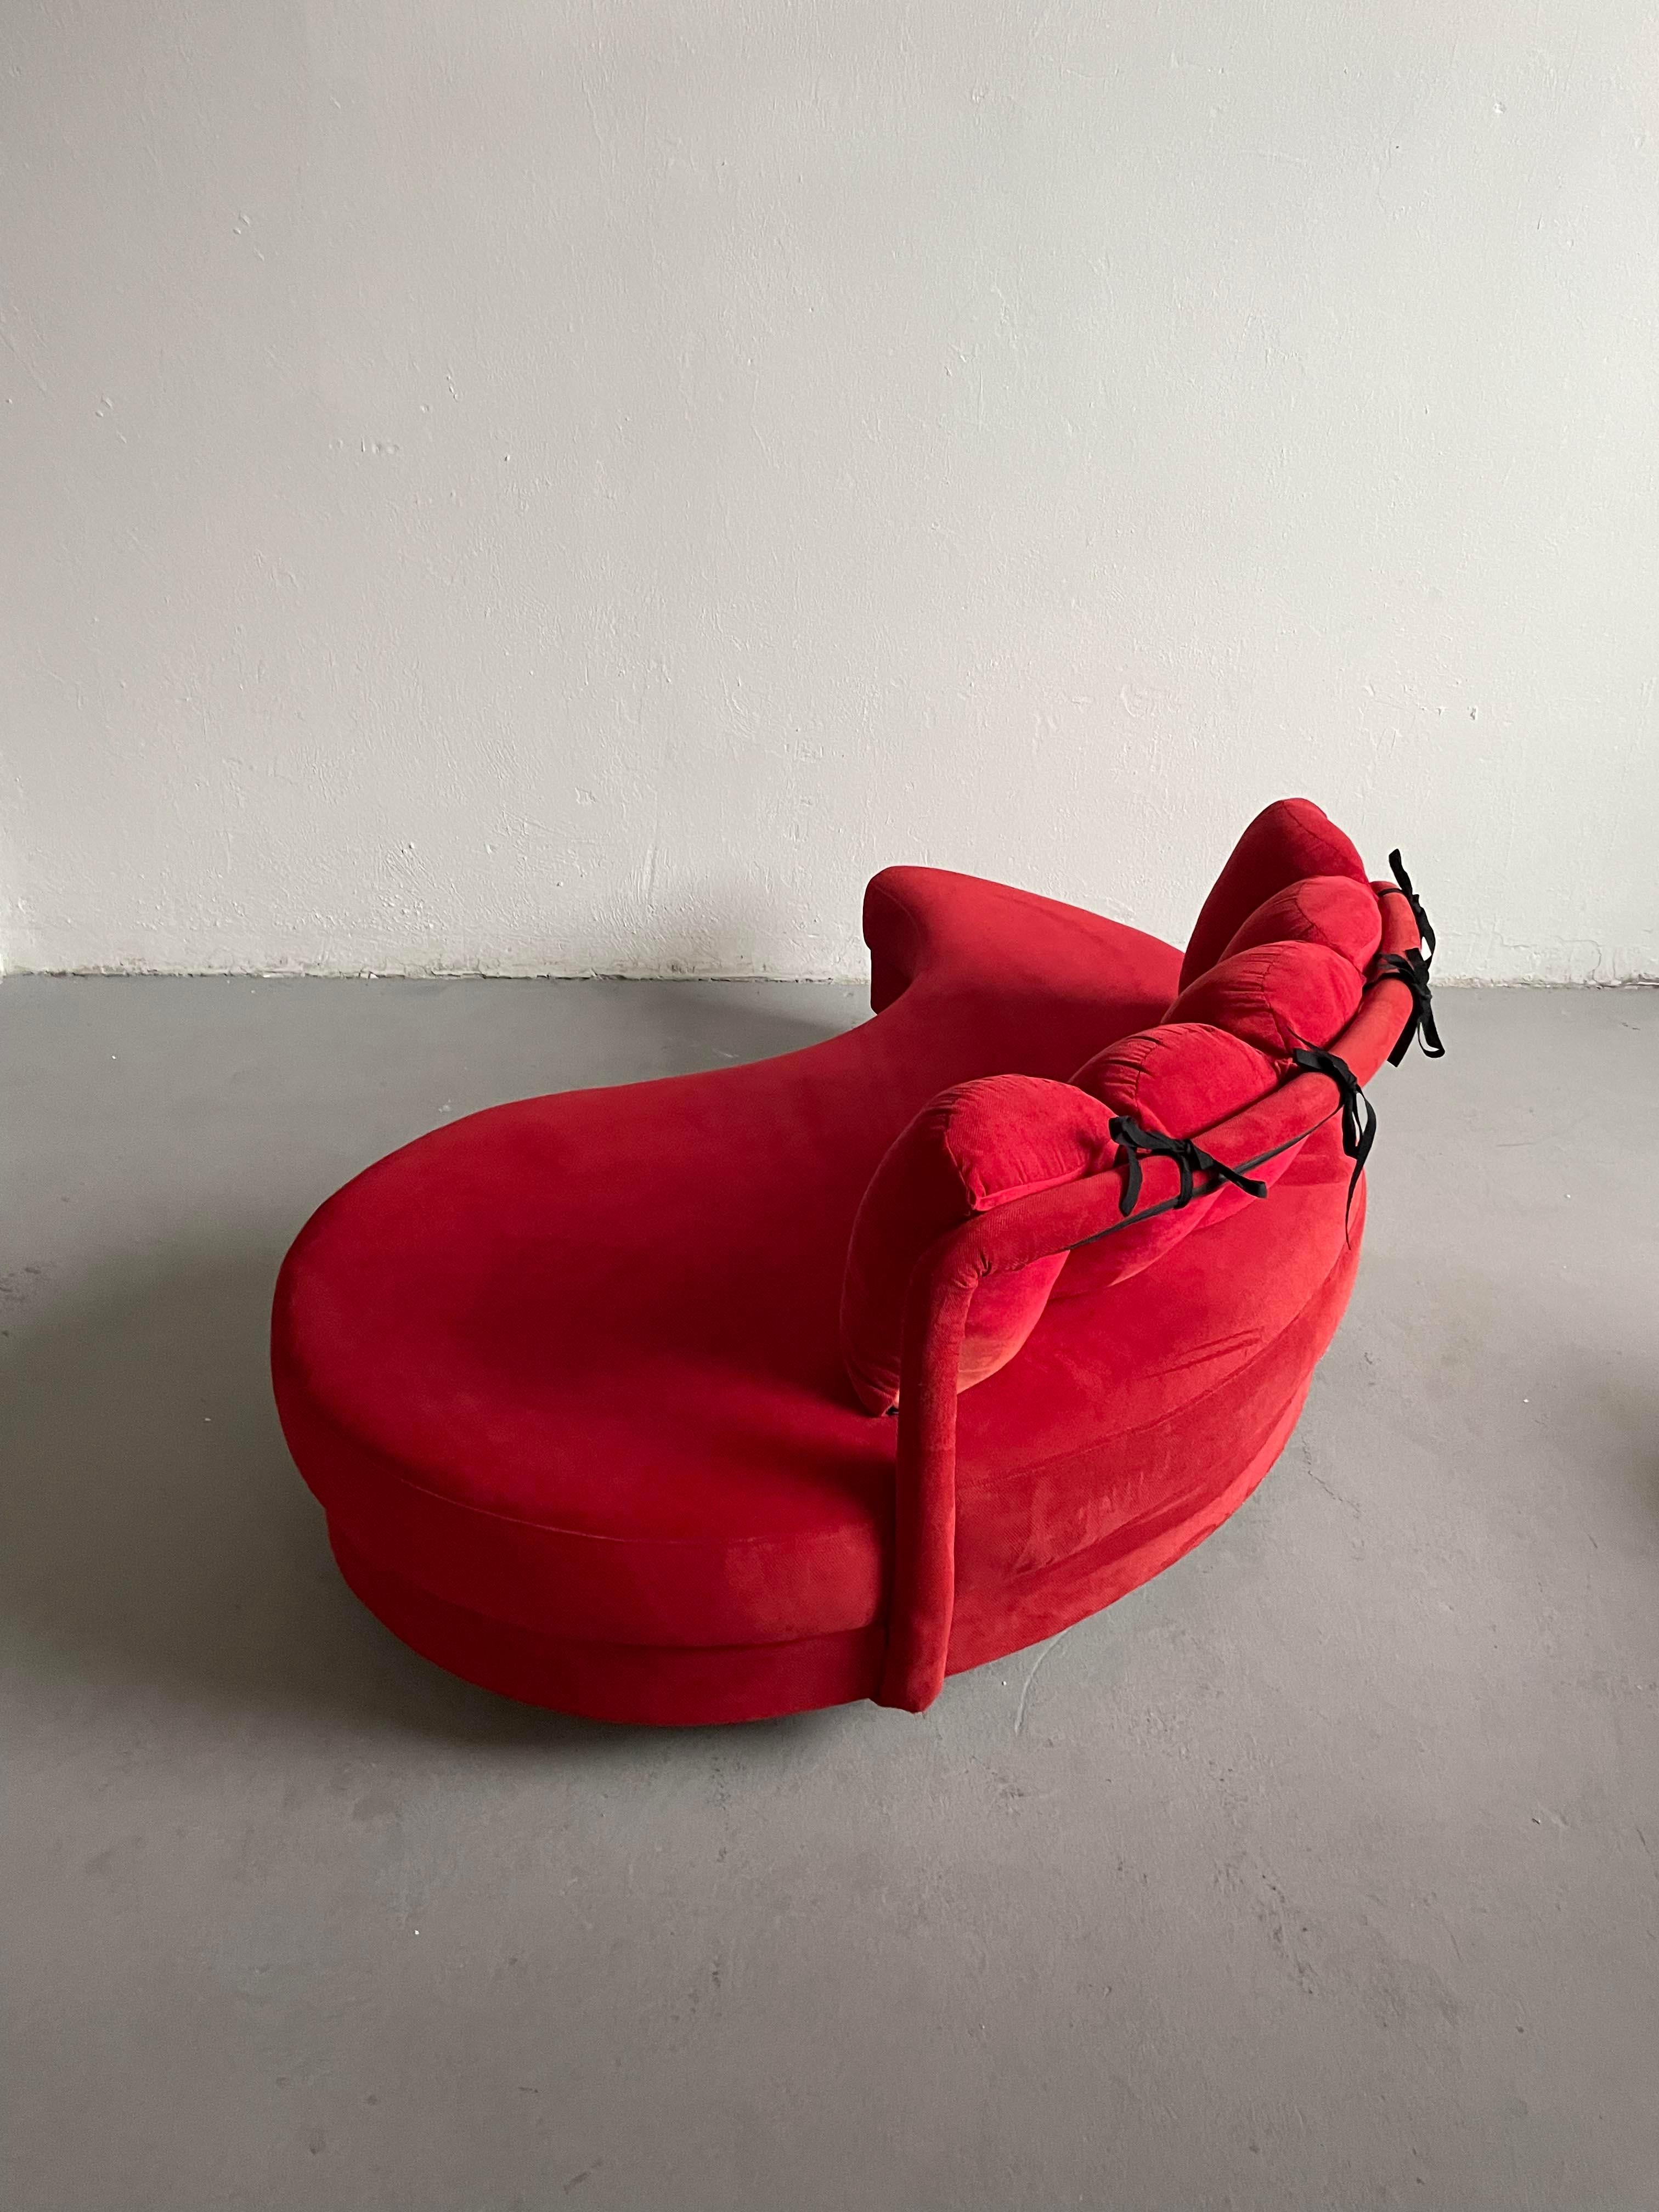 Set of 2 Postmodern Curved Yin-Yang Shaped Sofa Daybeds in Red Fabric, c 1980s For Sale 6